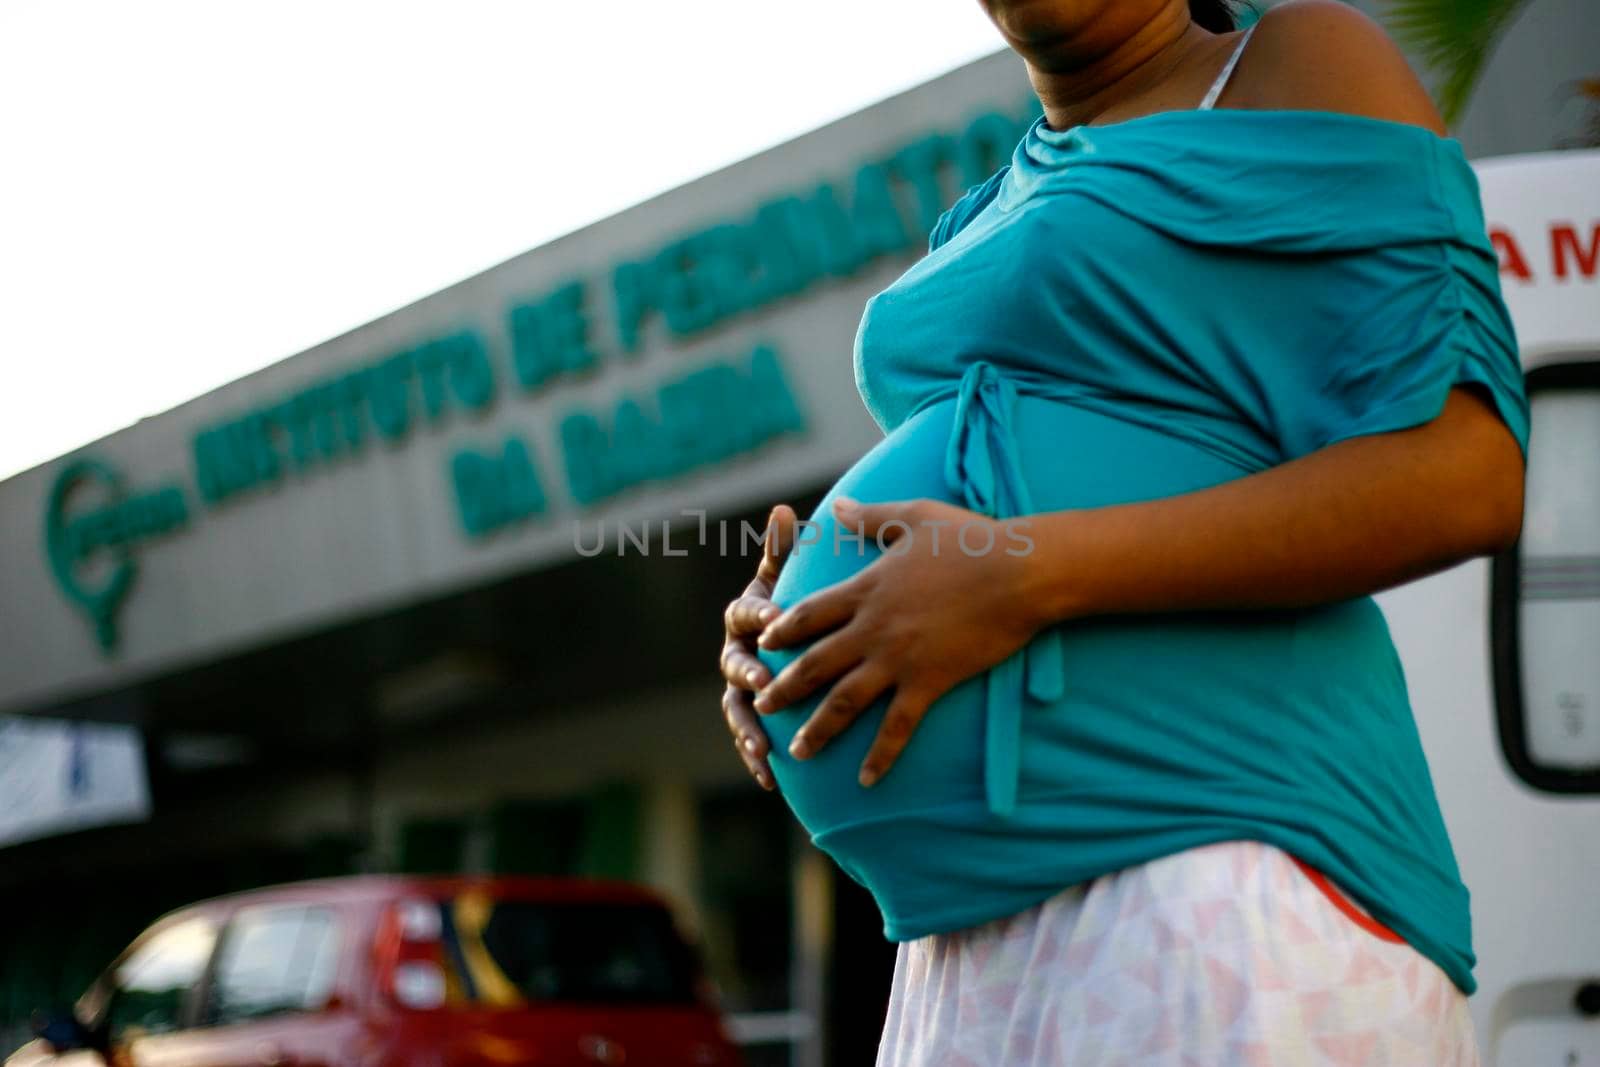 salvador, bahia, brazil - august 8, 2014: A pregnant woman is seen in front of the Iperba maternity hospital in the city of Salvador.